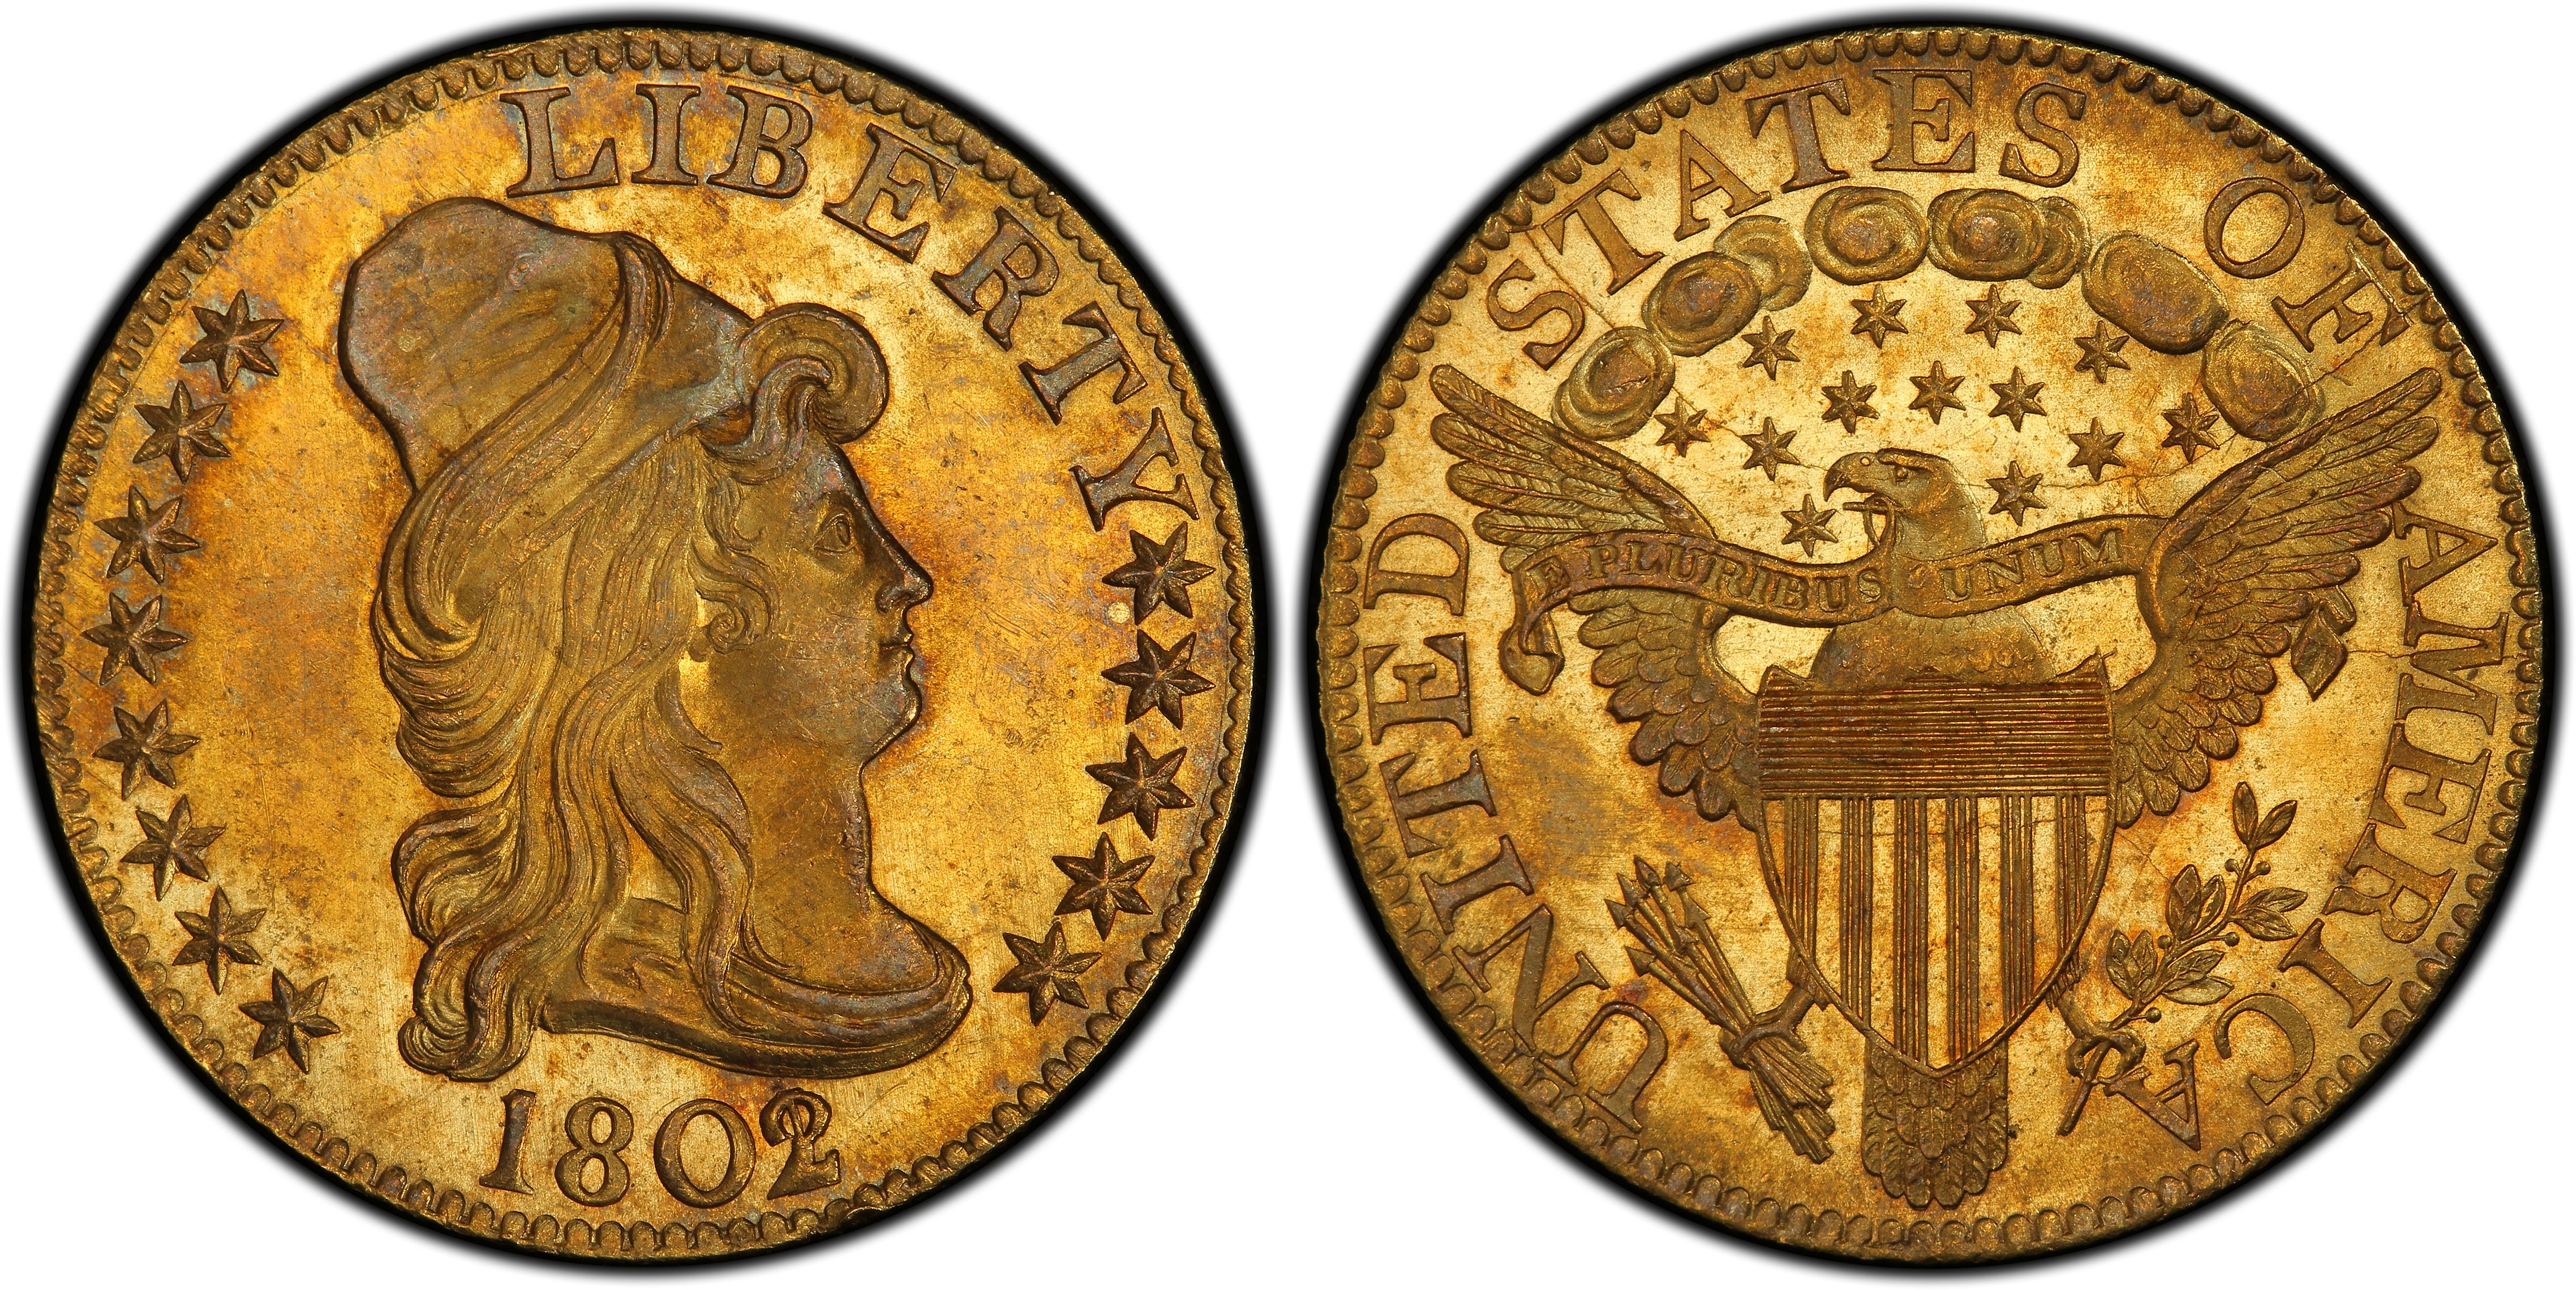 1802/1 $5 (Regular Strike) Draped Bust $5 - PCGS CoinFacts